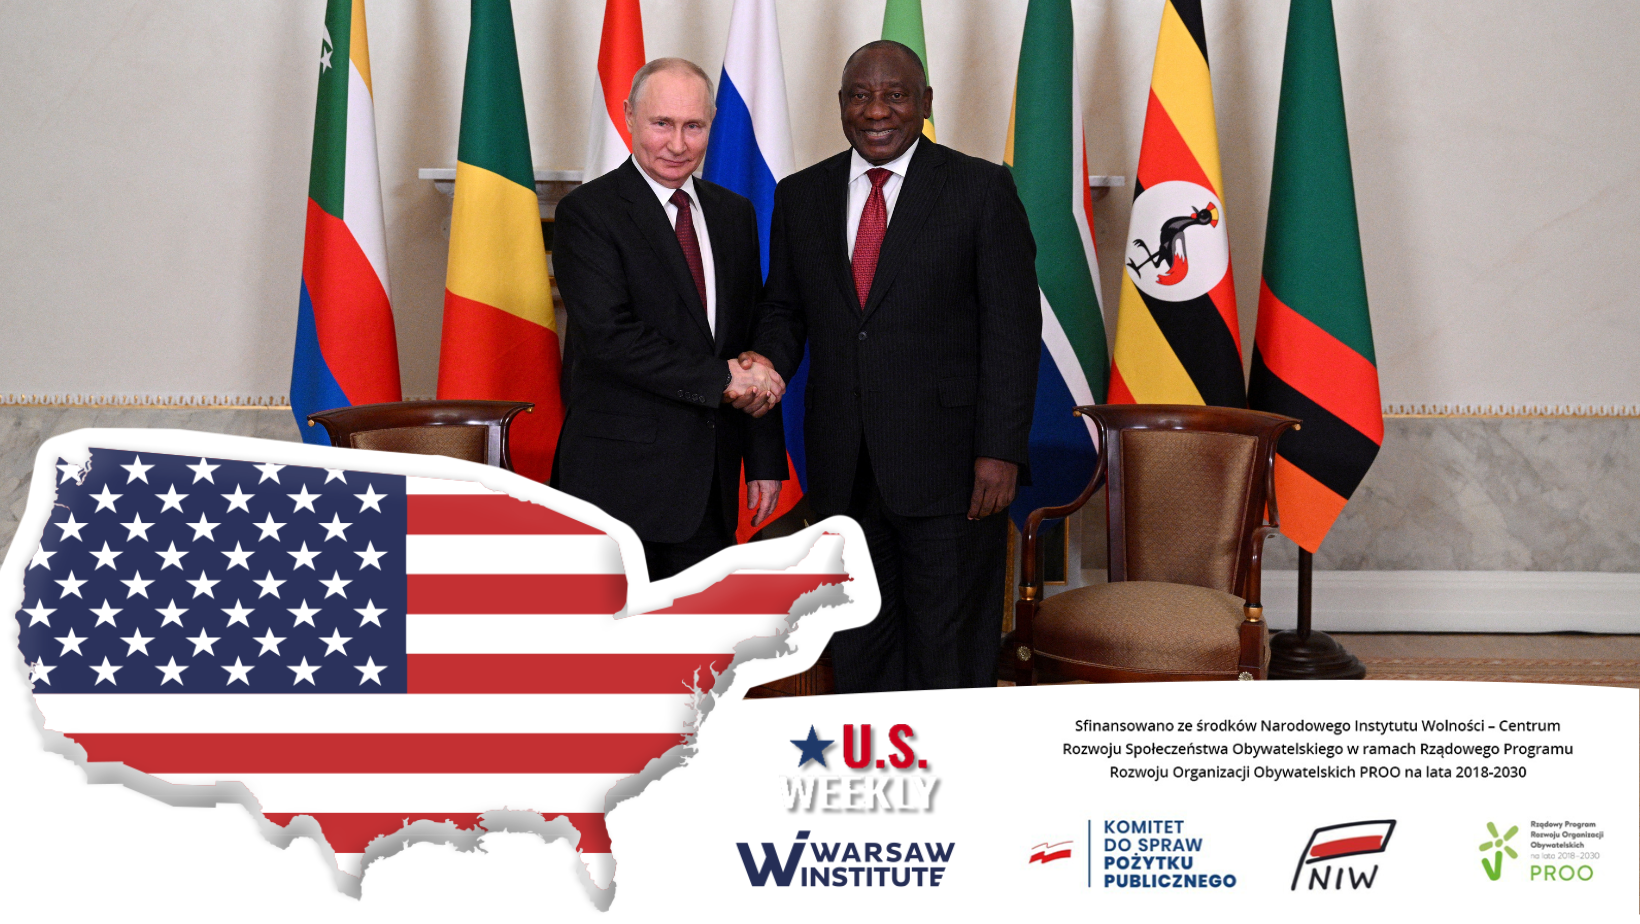 Why should we be concerned about Russia’s ideological imperialism in Africa